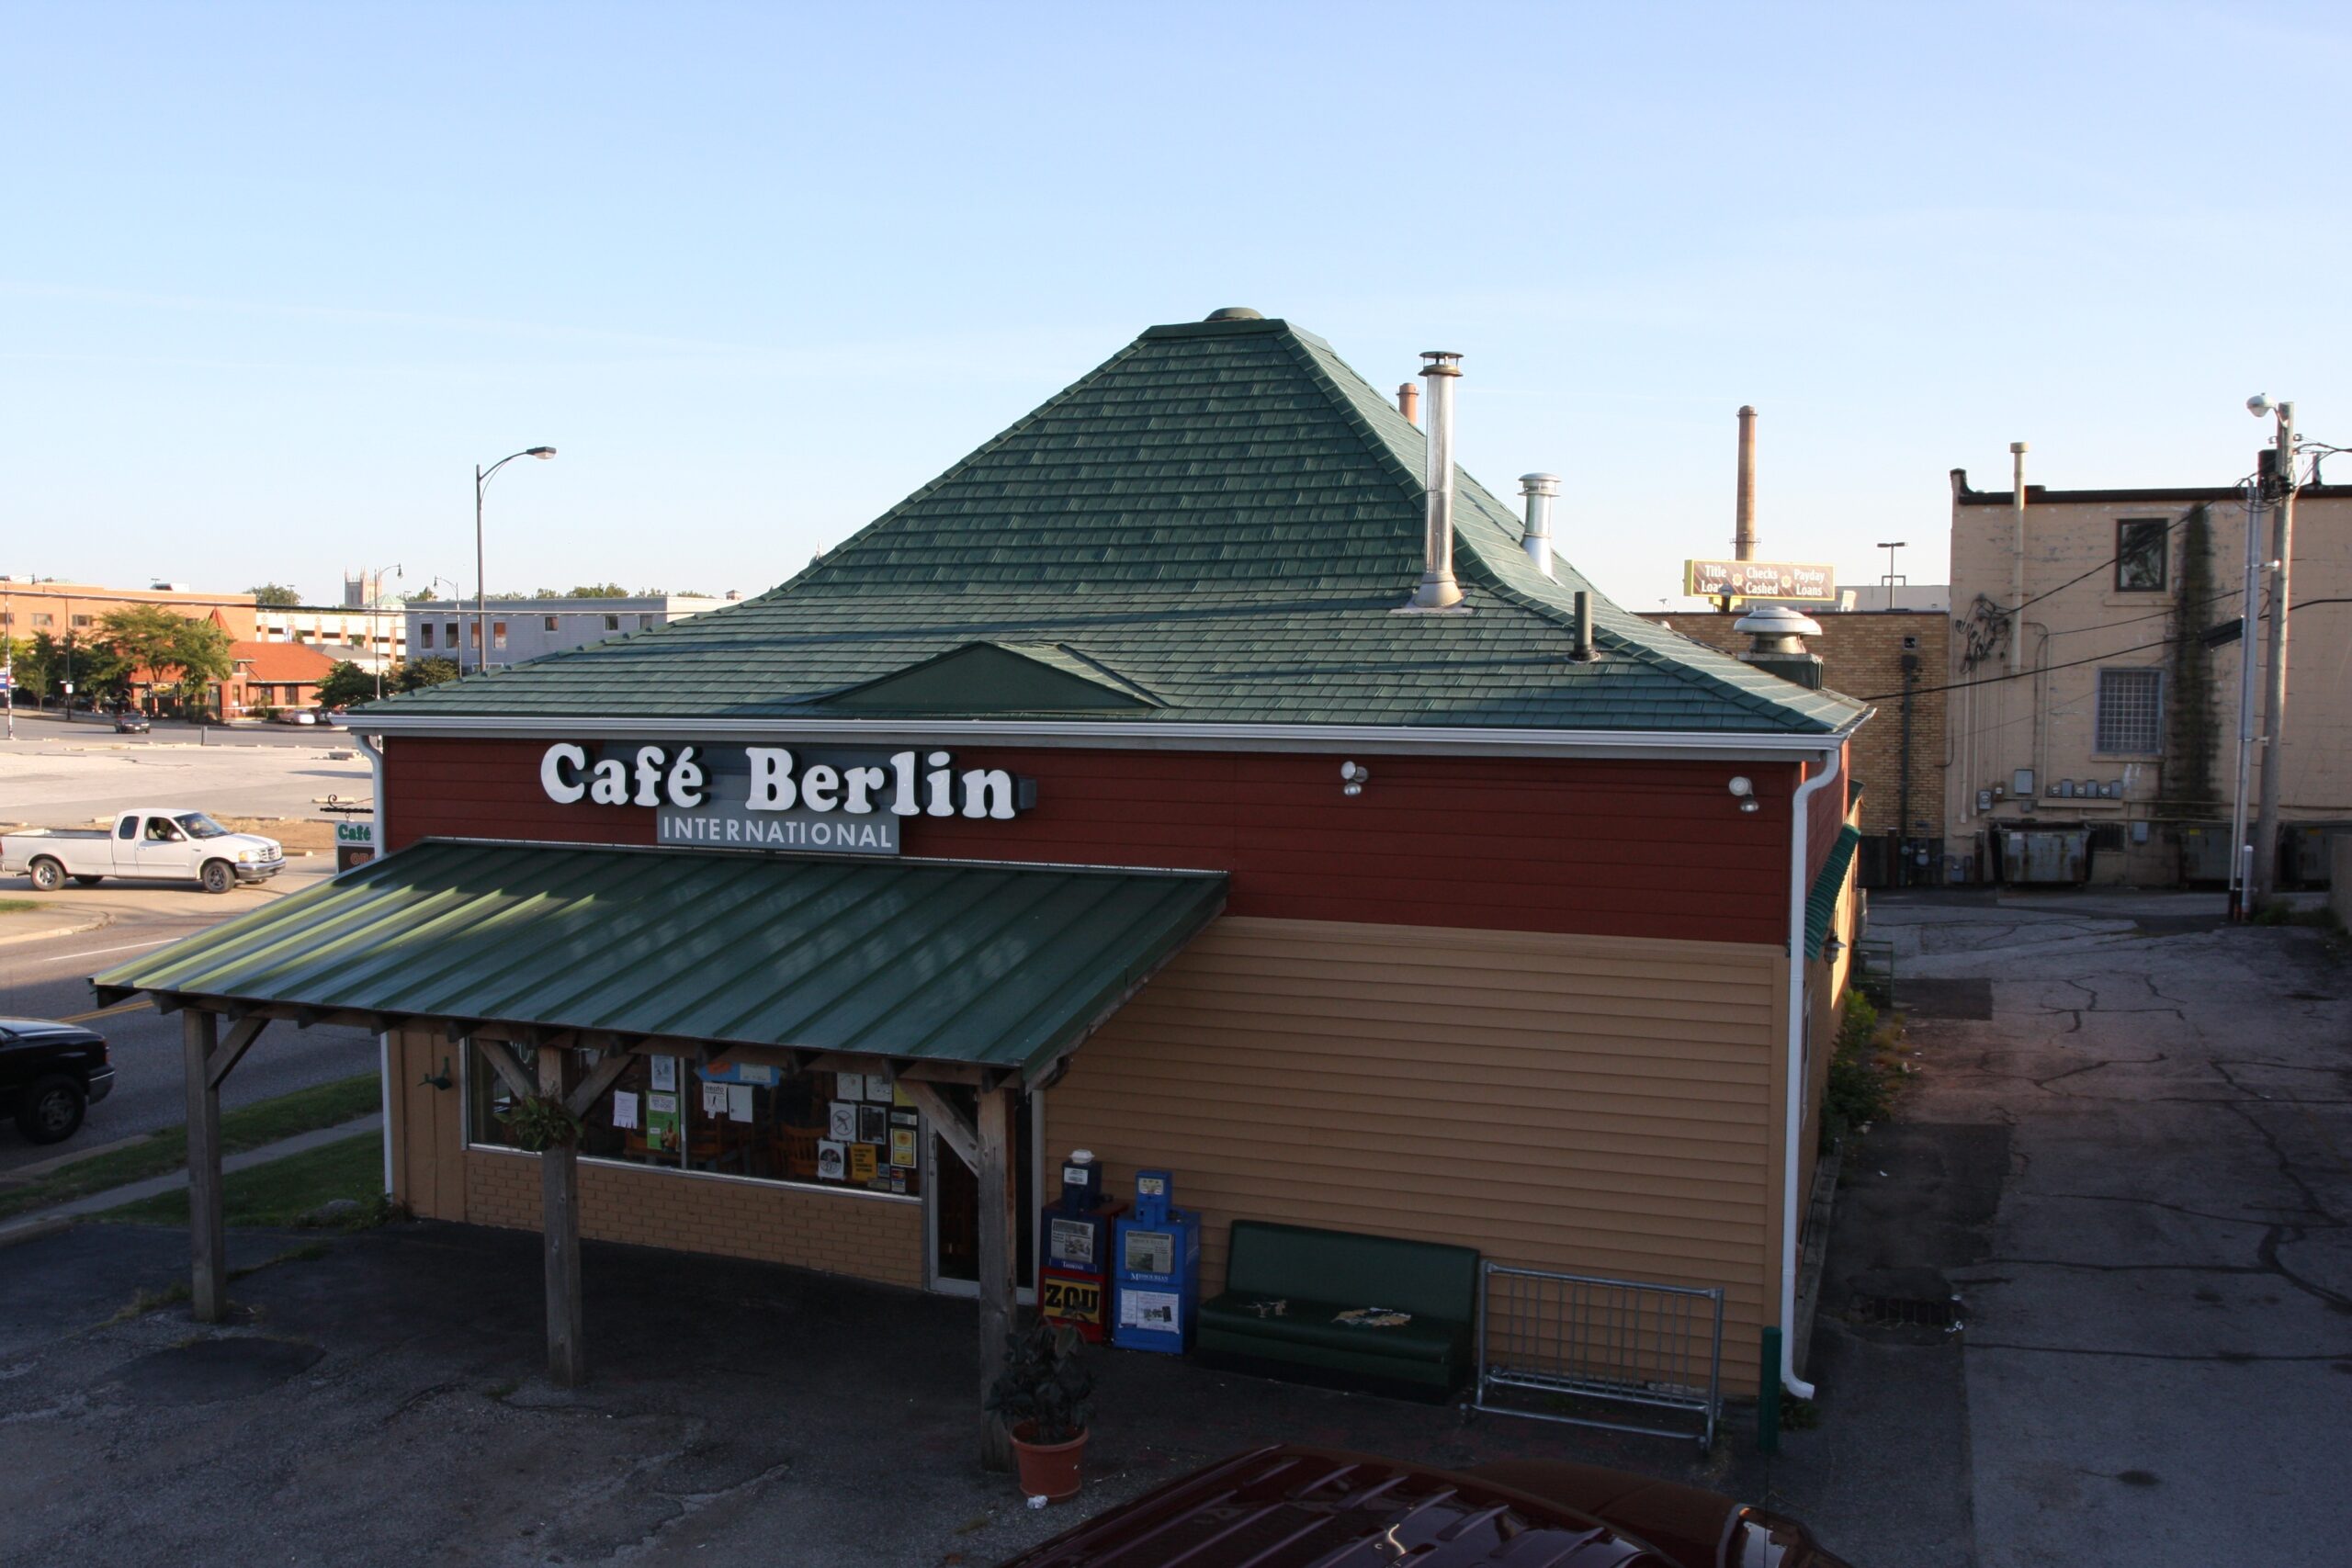 Cafe Berlin new green roof with metal awning. Covered patio area at Cafe Berlin